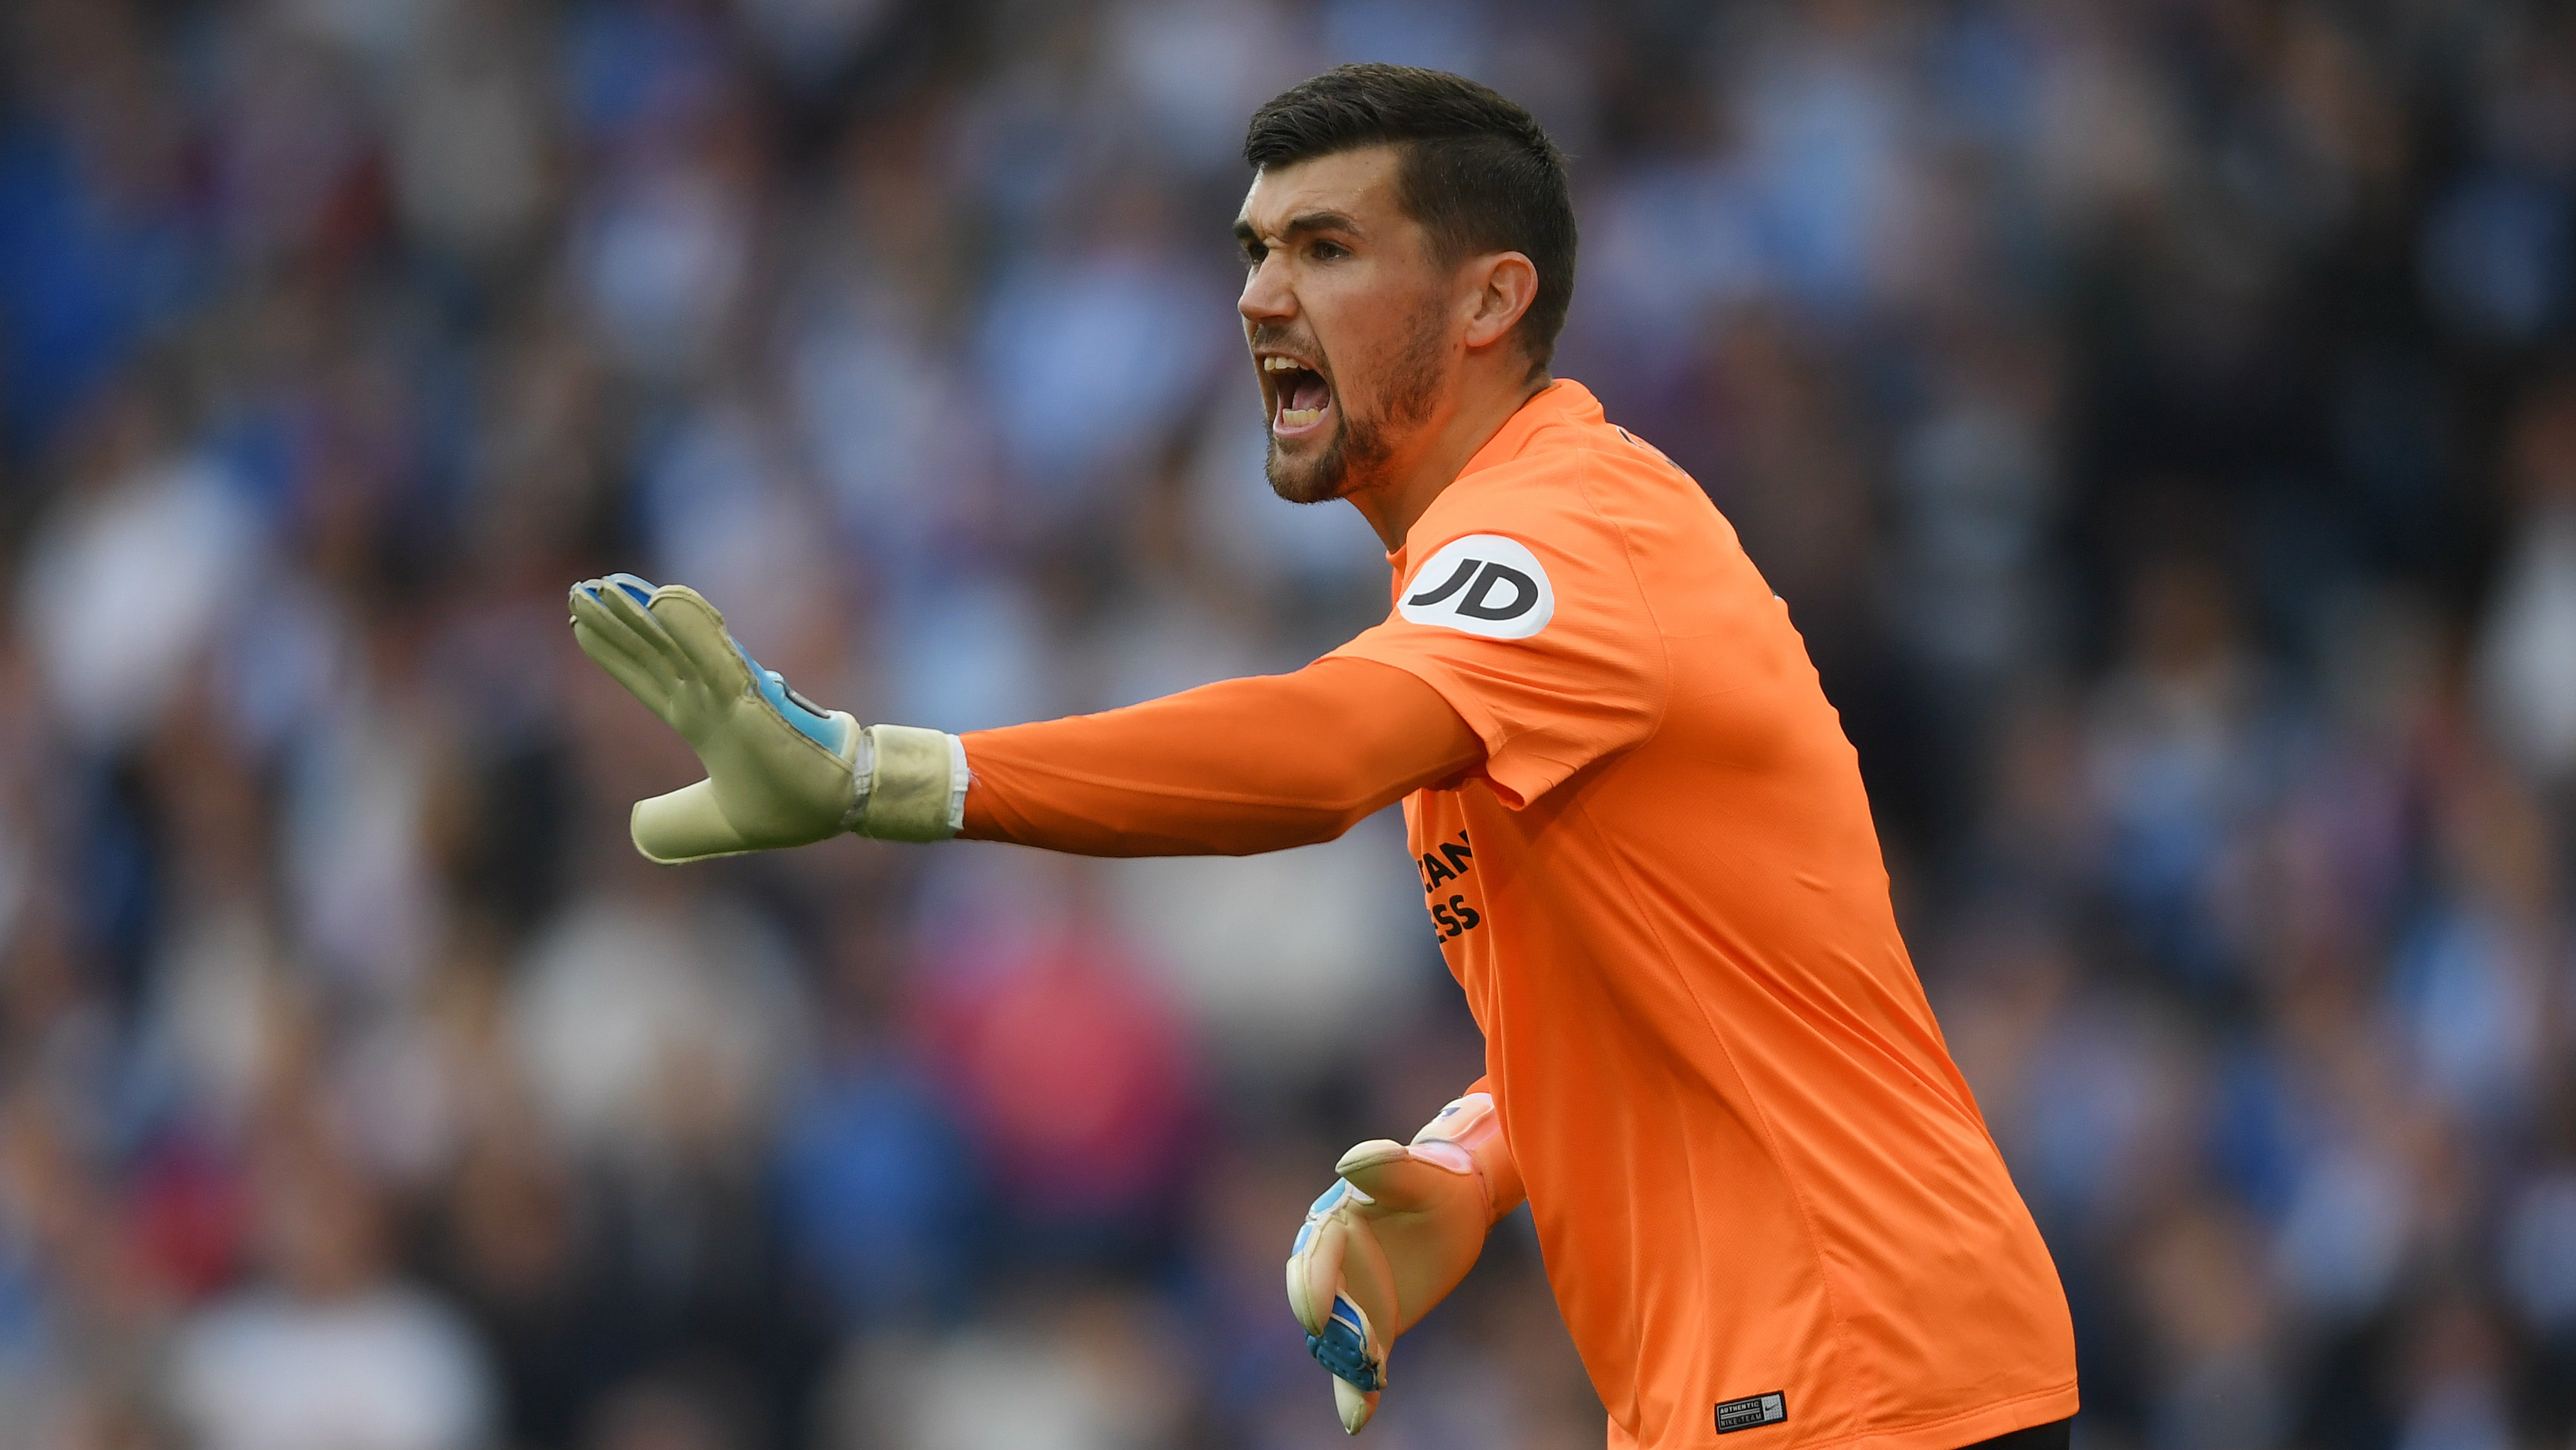 Mat Ryan kept a clean sheet in Brighton's win over Newcastle.